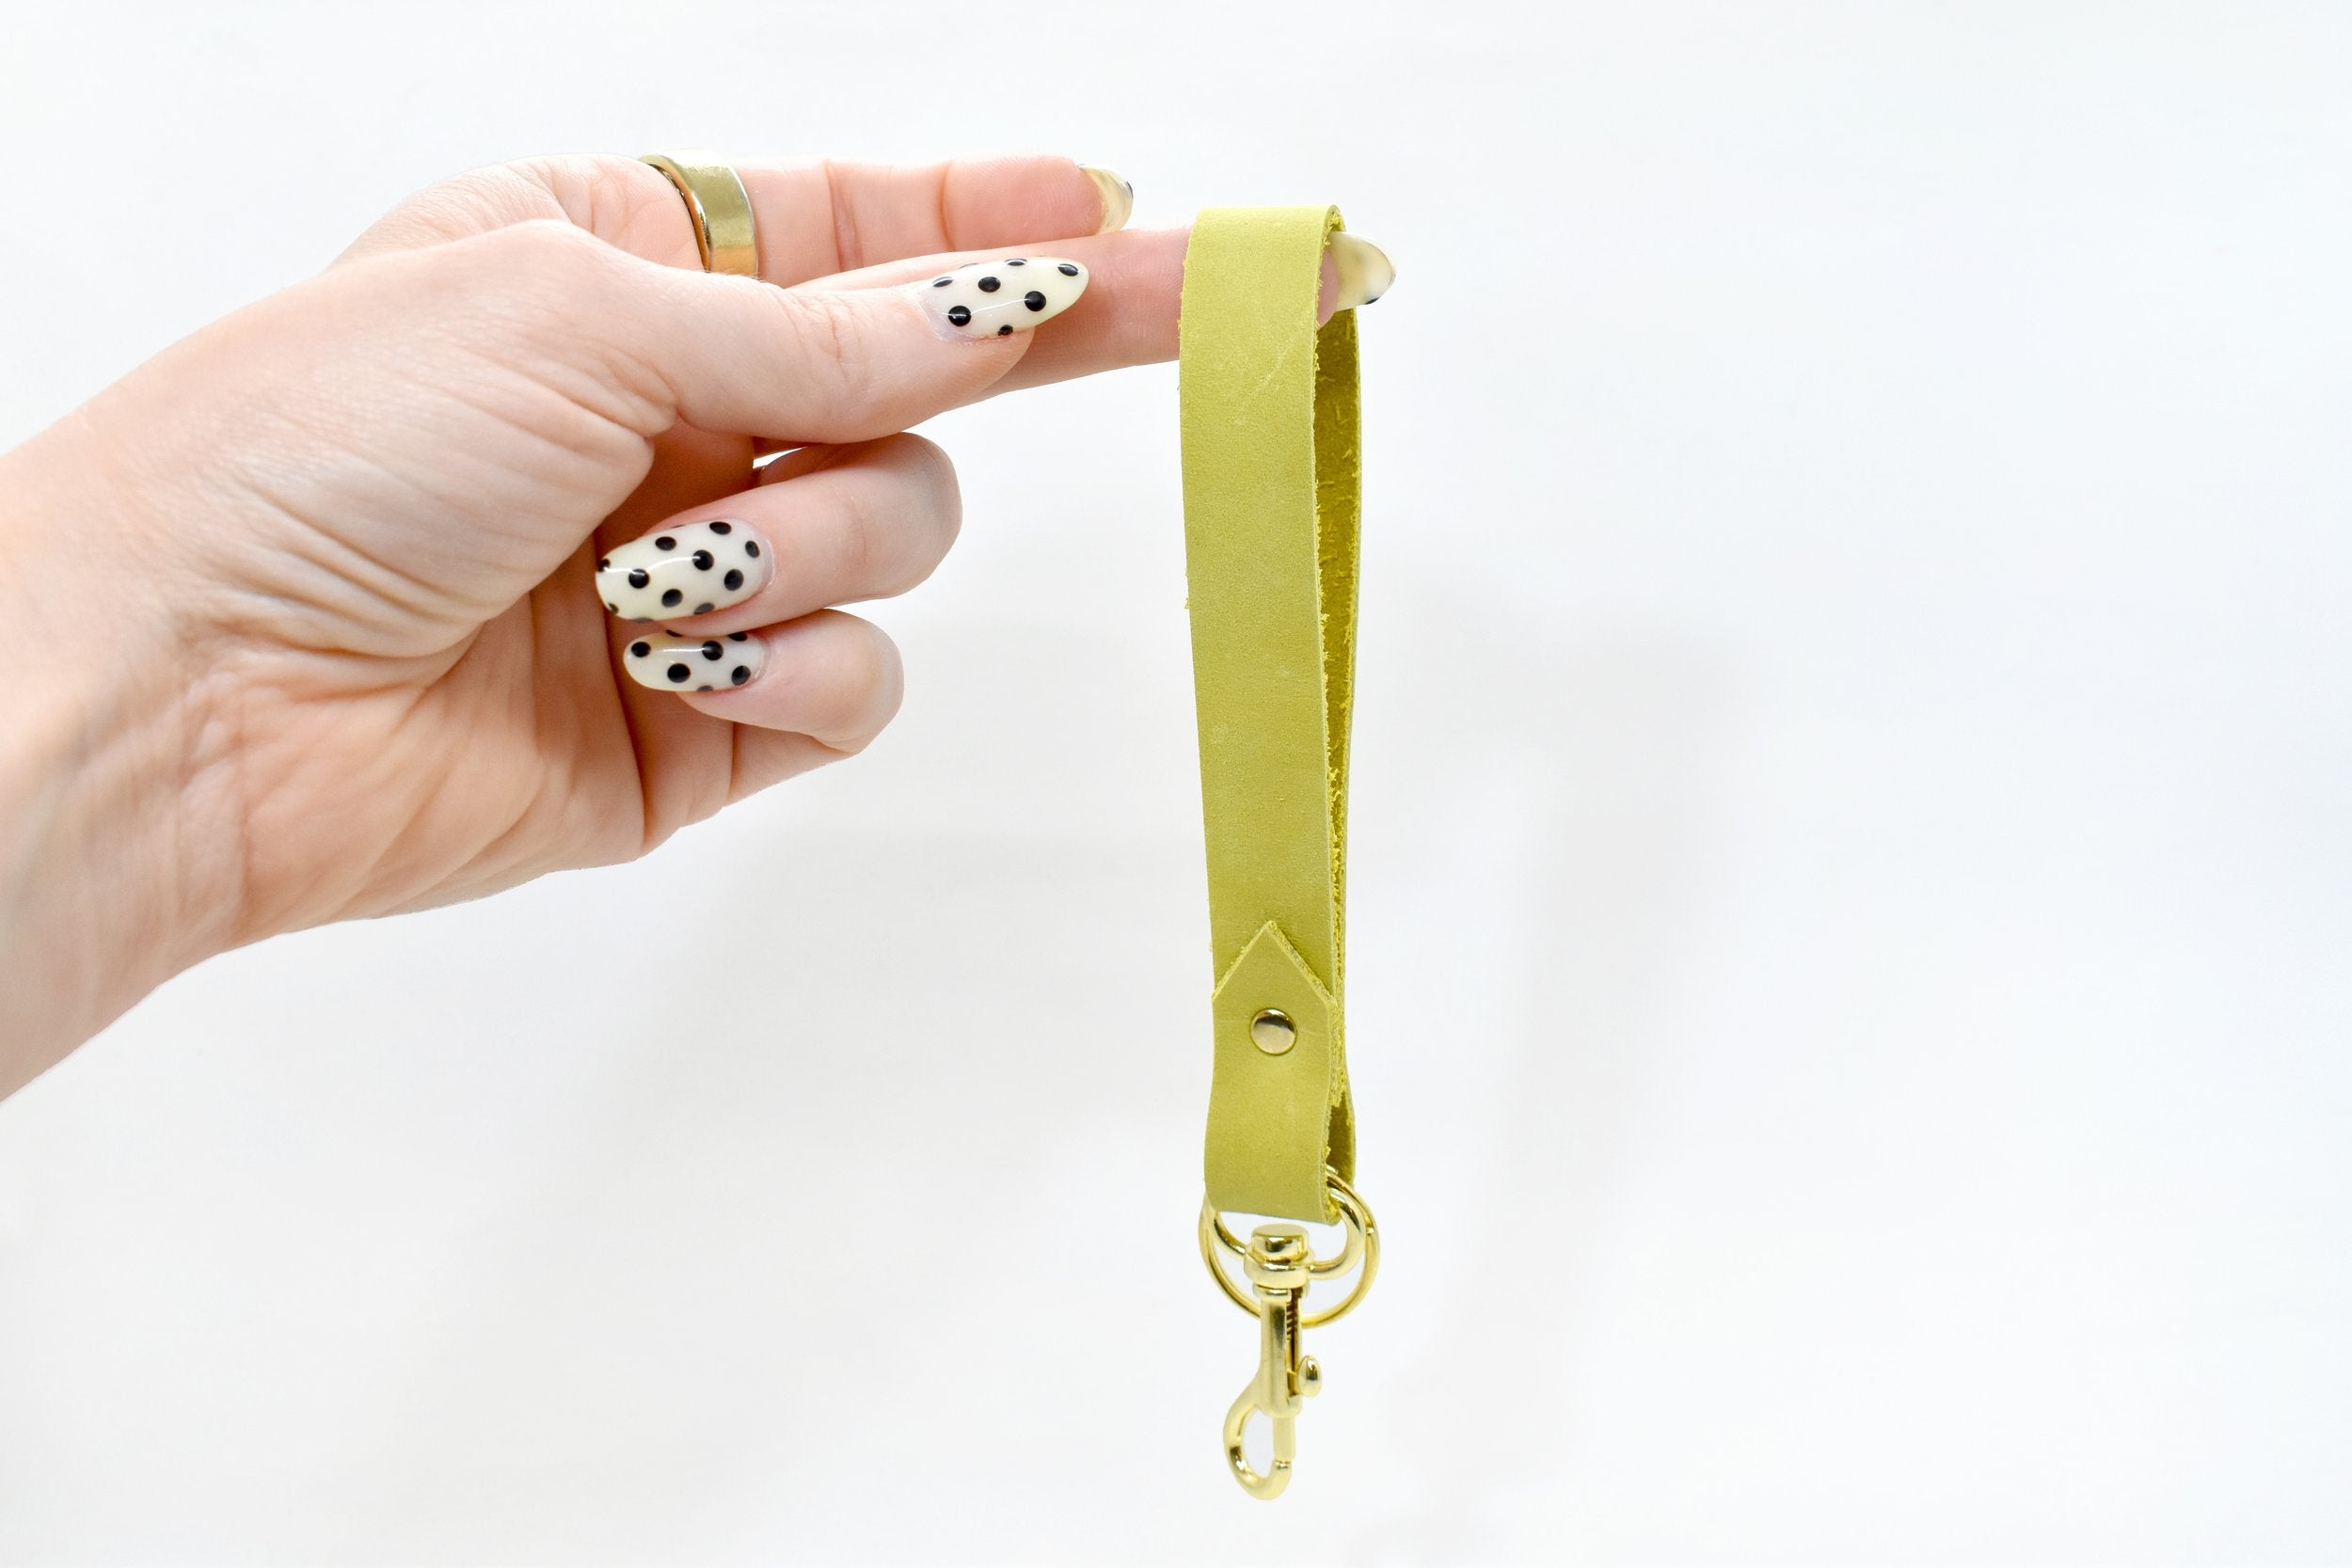 the classic cut leather chartreuse wristlet keychain rests on a finger